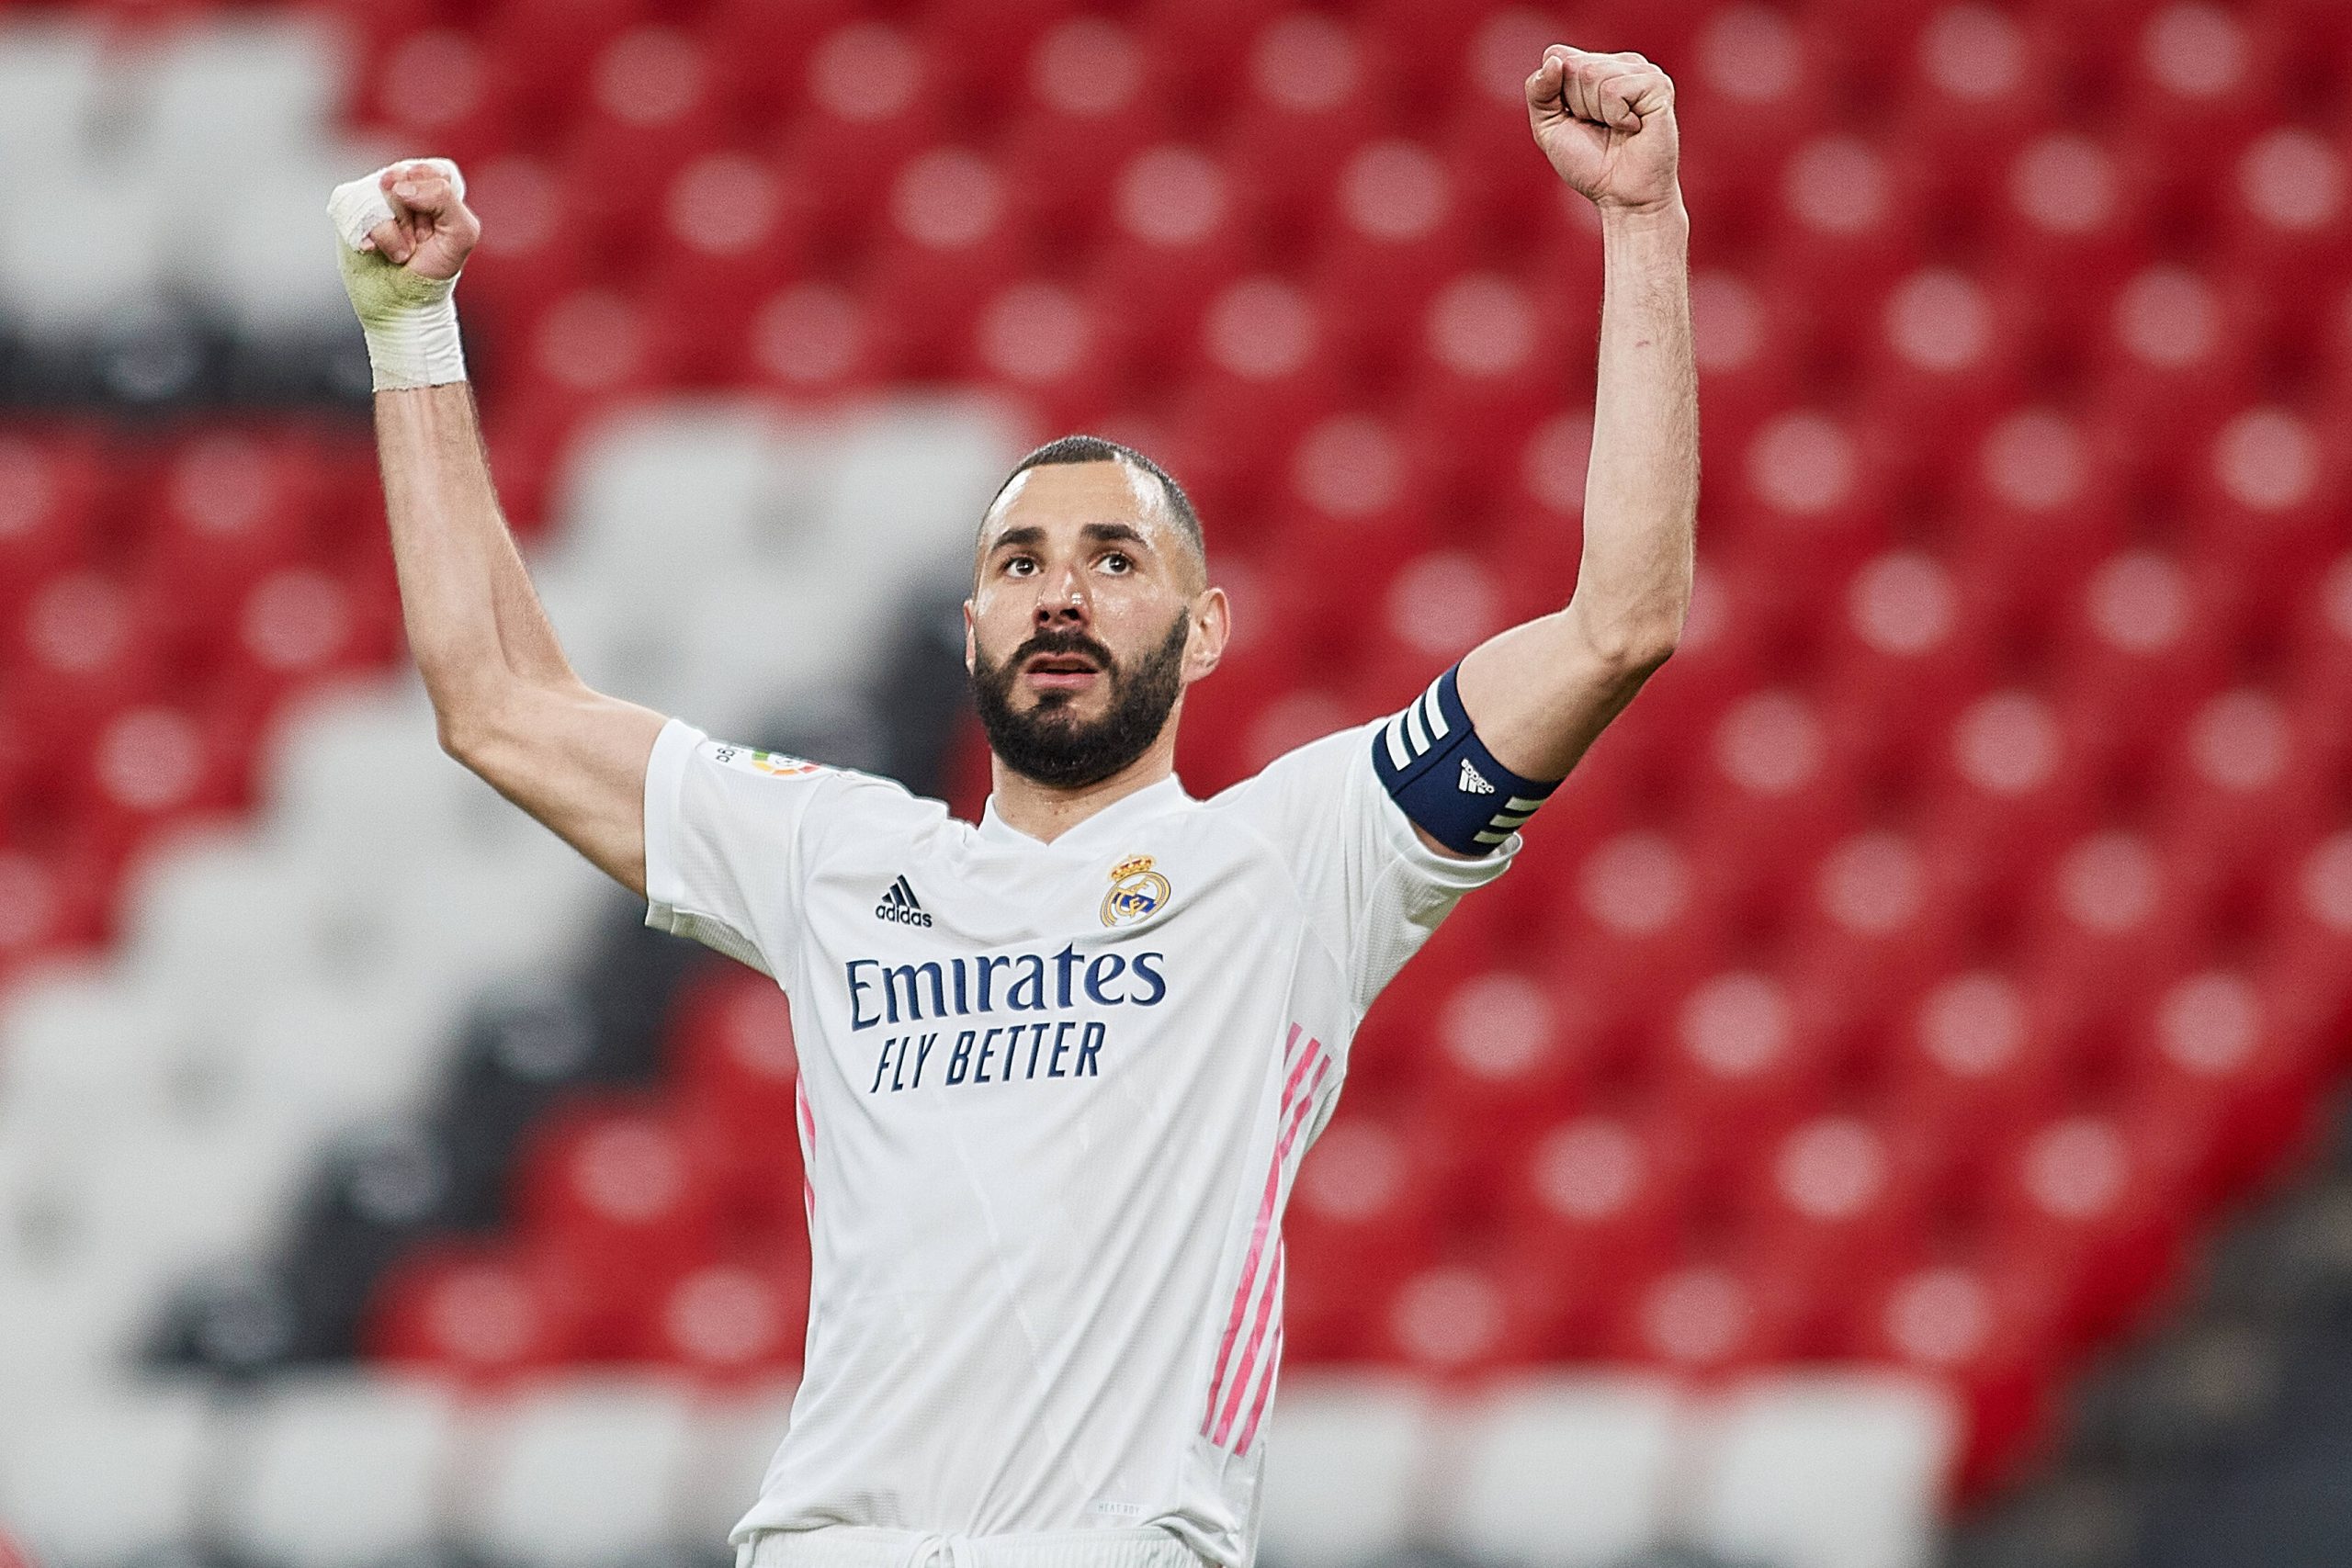 Real Madrid Have Extended Their Contract With the Striker Benzema